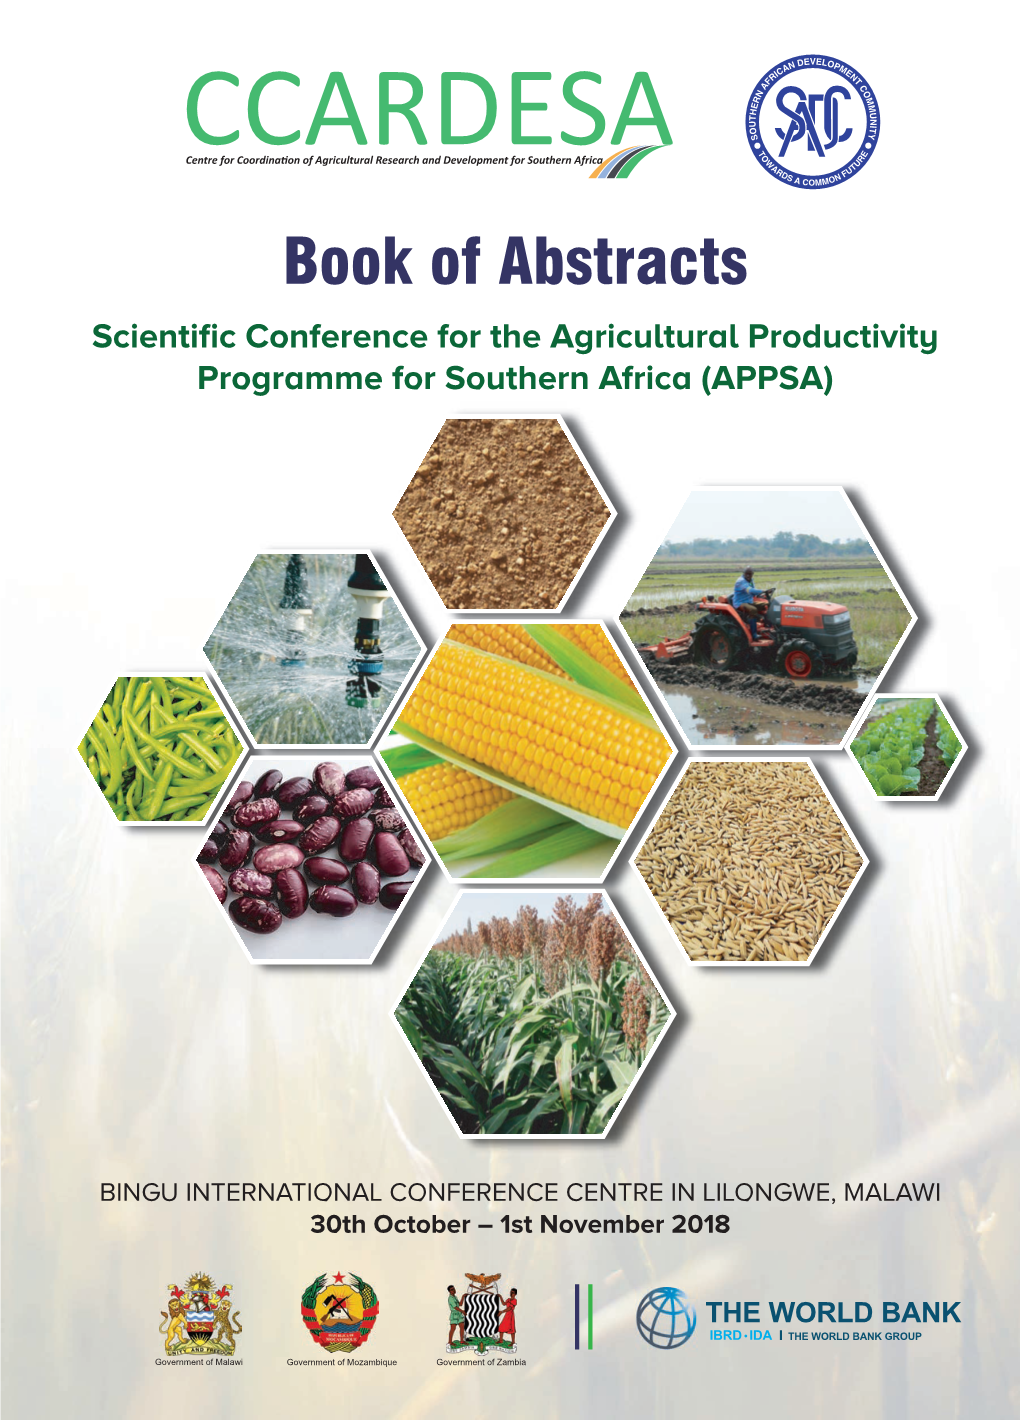 Book of Abstracts Scientiﬁc Conference for the Agricultural Productivity Programme for Southern Africa (APPSA)